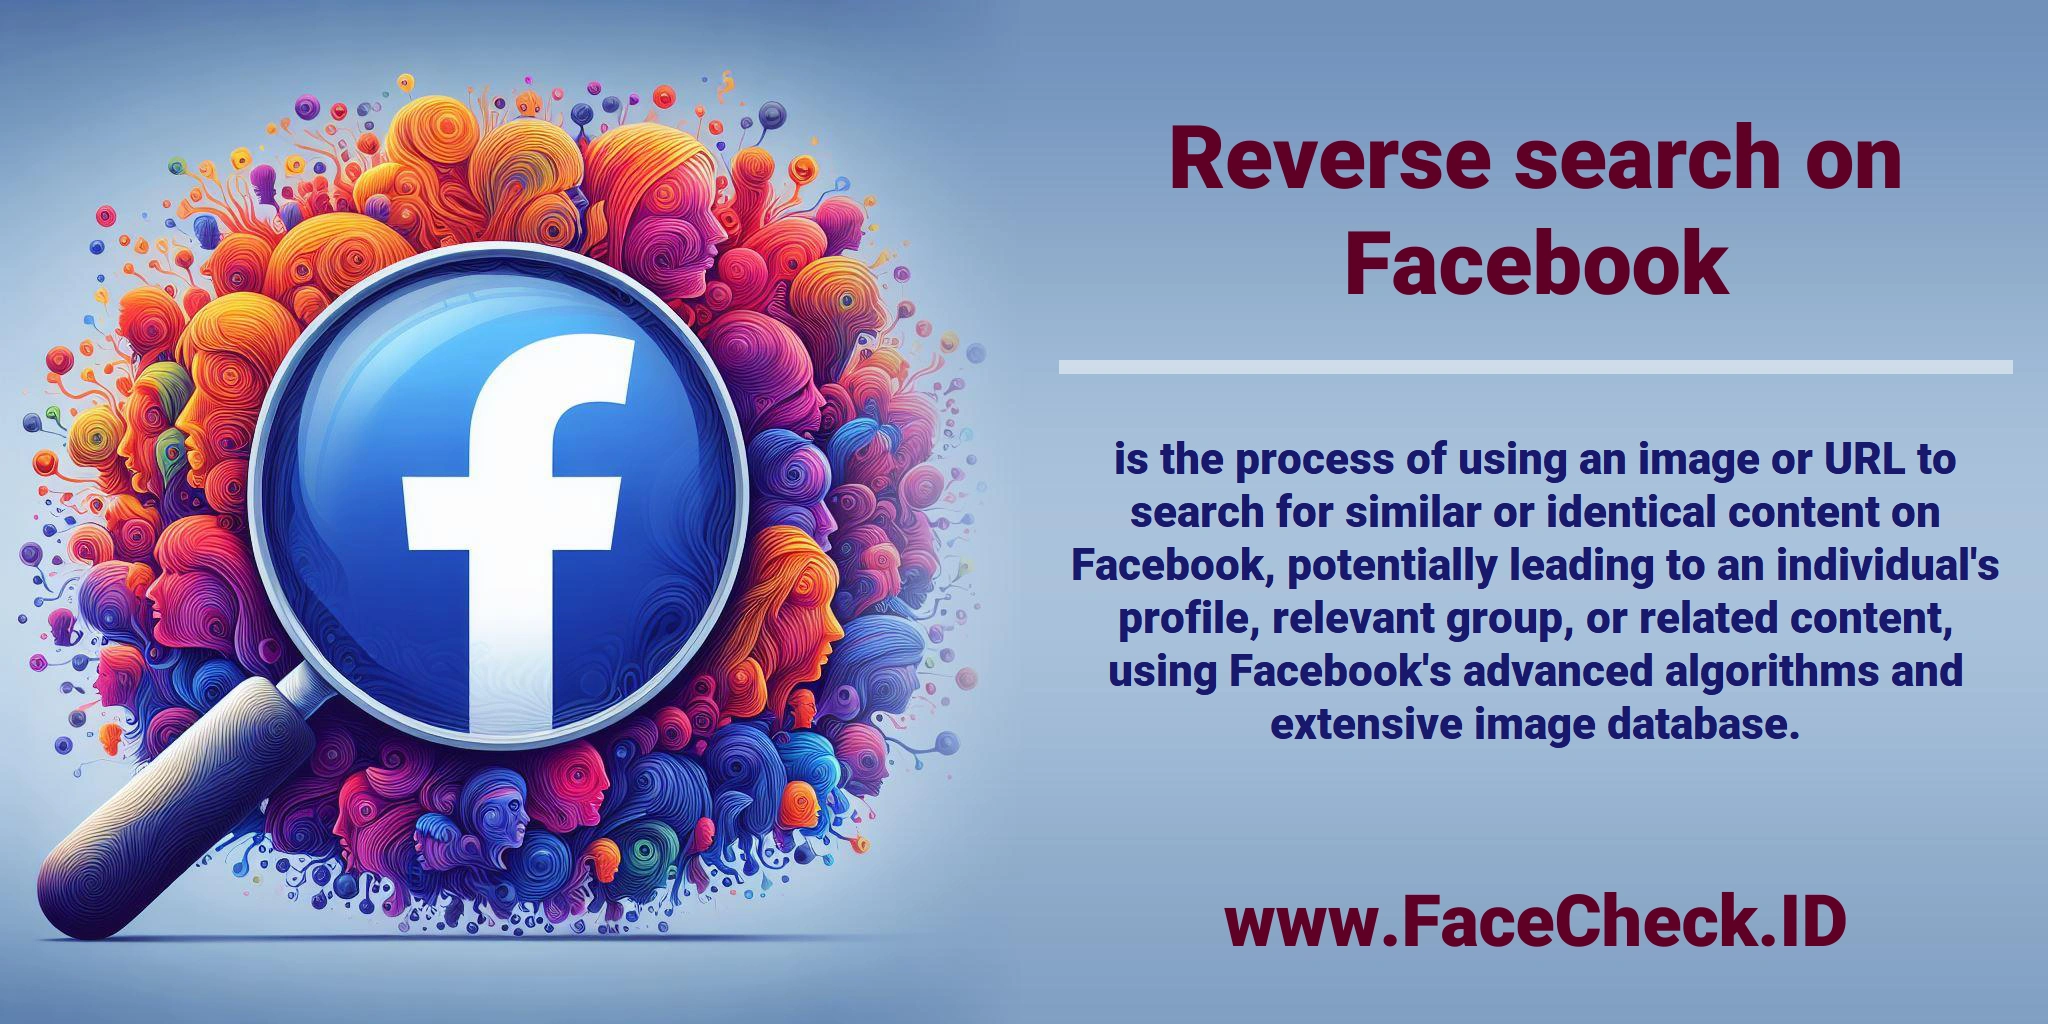 <b>Reverse search on Facebook</b> is the process of using an image or URL to search for similar or identical content on Facebook, potentially leading to an individual's profile, relevant group, or related content, using Facebook's advanced algorithms and extensive image database.
